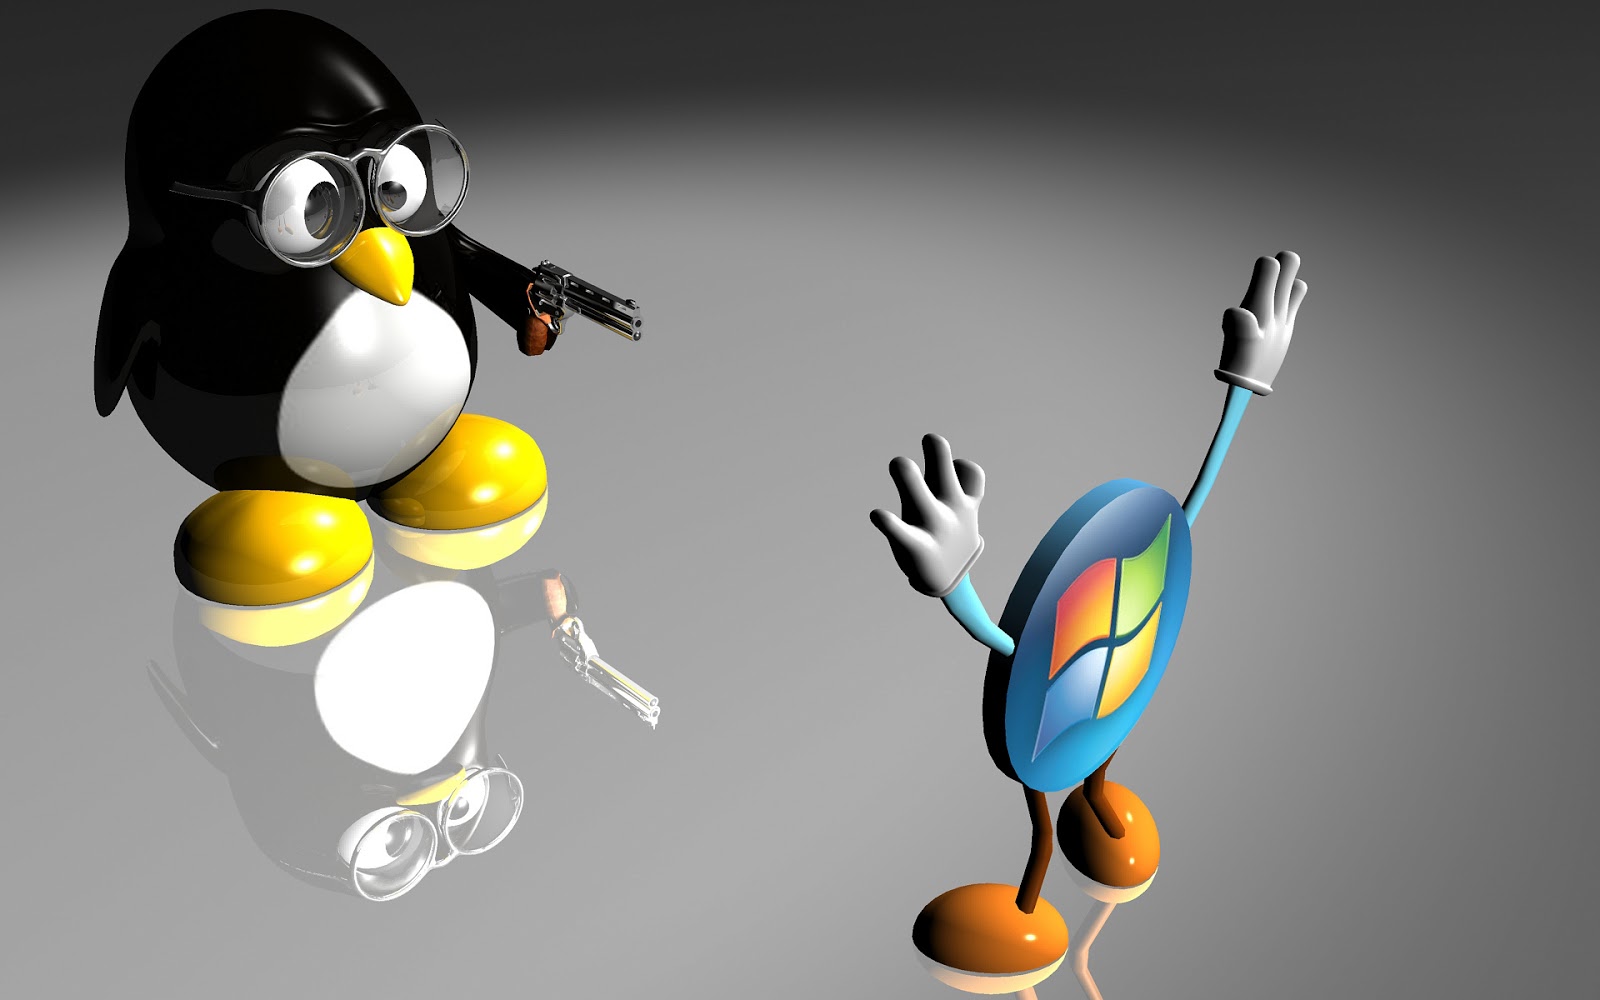 Linux VS Windows and Mac Wallpaper 1440x900 by TheKrzysiekArt on DeviantArt  | Mac wallpaper, Linux, Mac